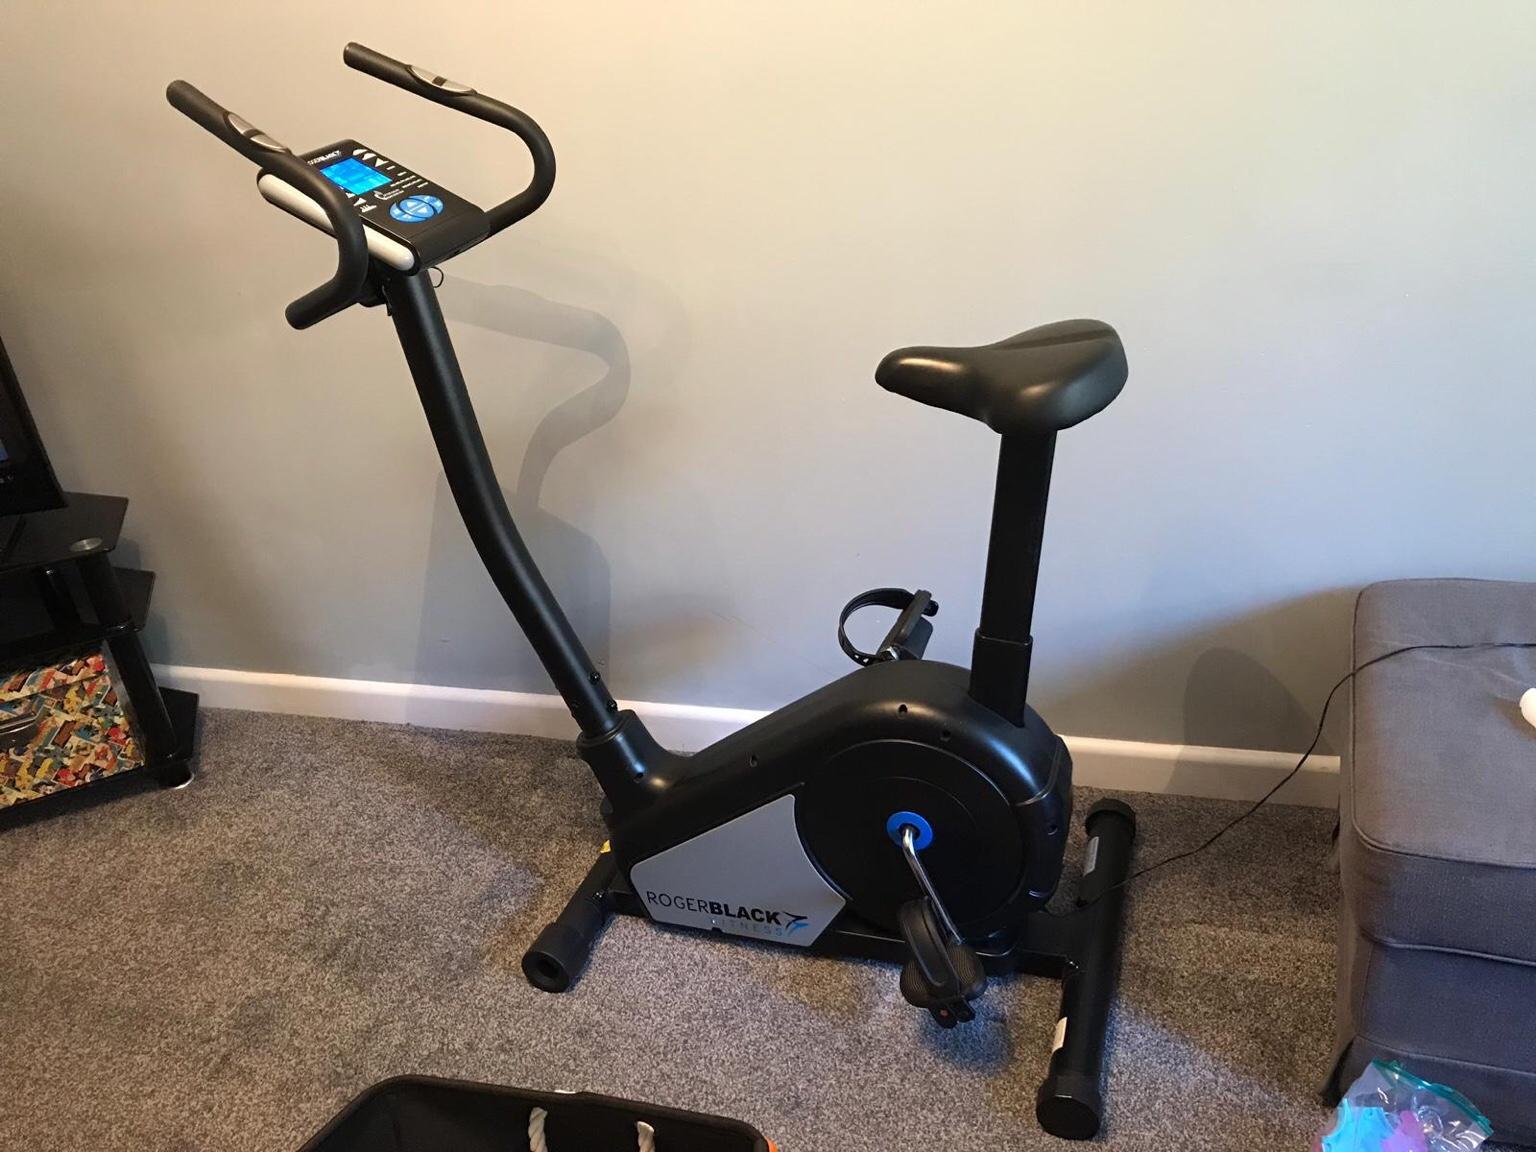 Roger Black GOLD Folding Magnetic Exercise Bike READY TO DISPATCH! IN STOCK